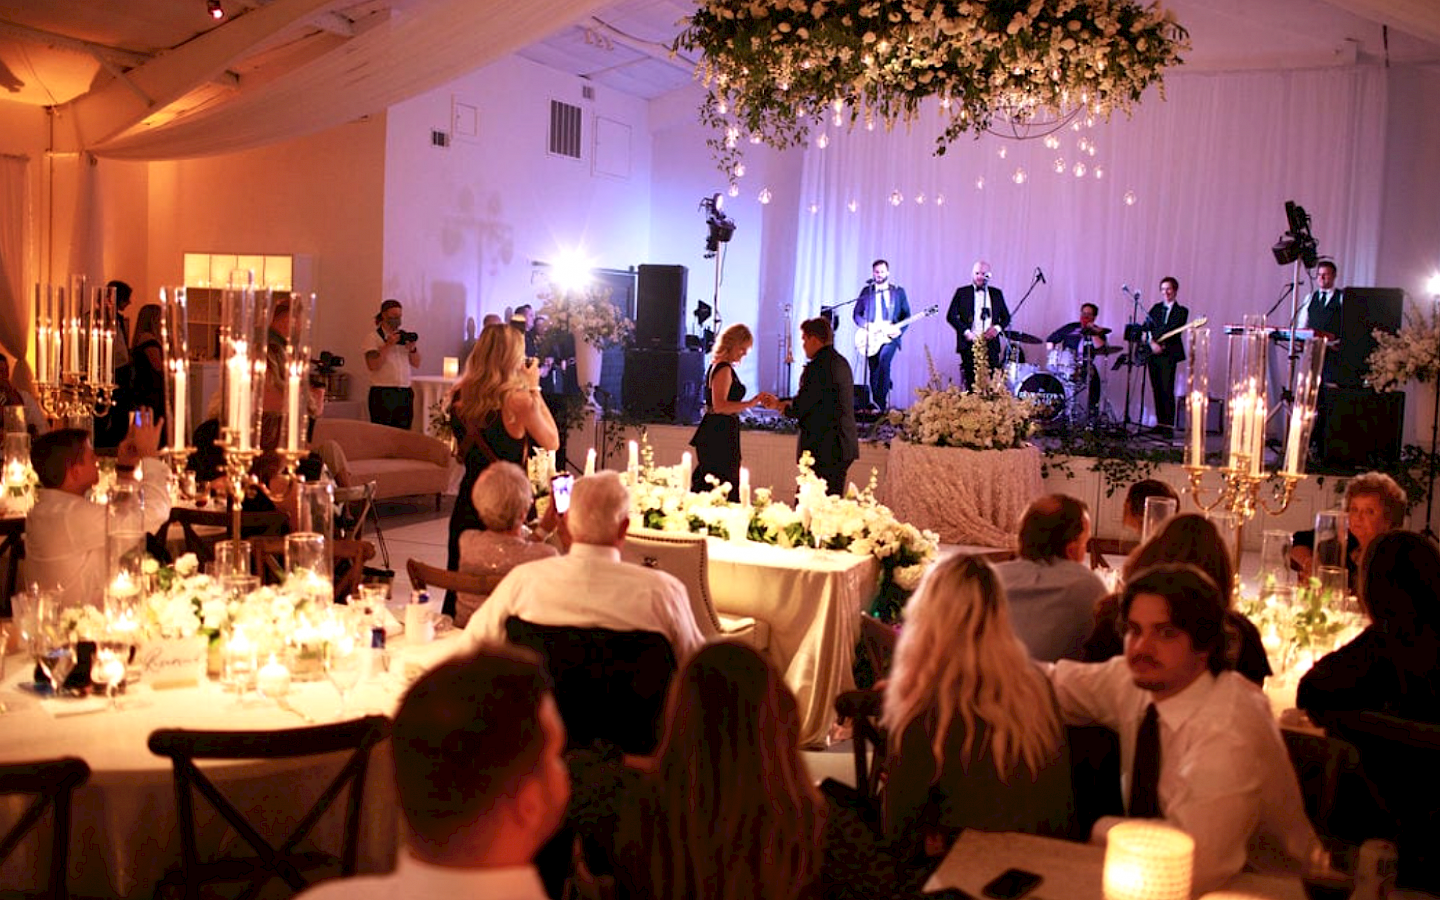 guest set in a romantically lit large room, with a band on stage performing